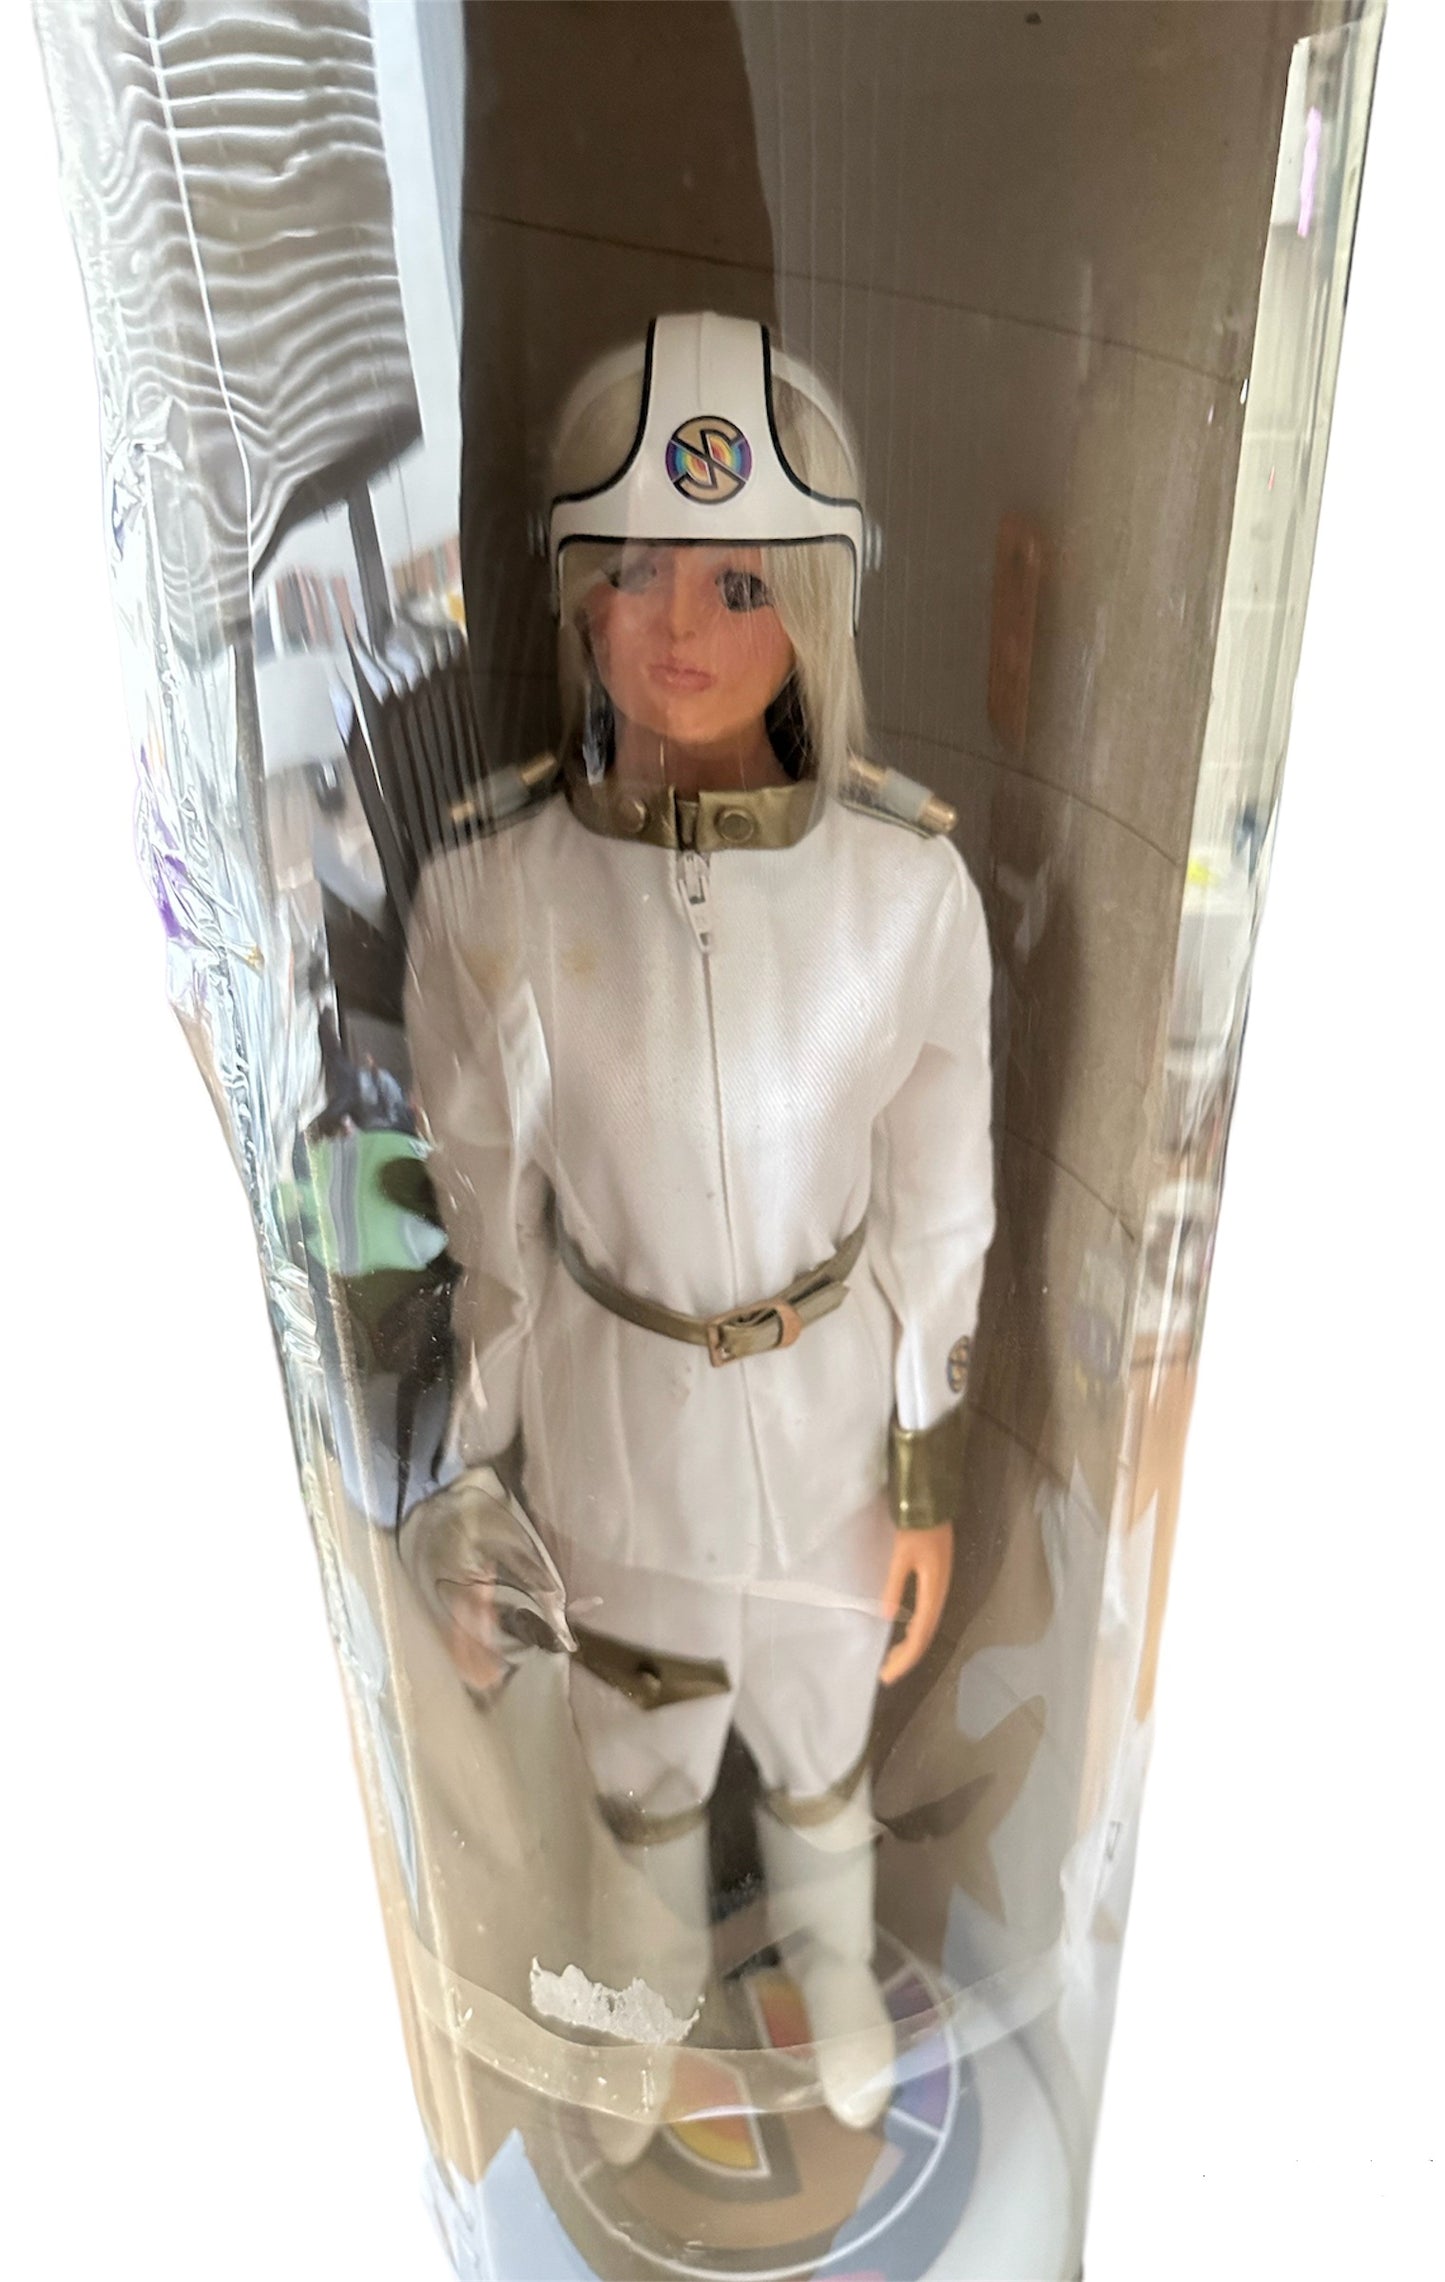 Vintage 2009 Iconic Replicas - Gerry Andersons Captain Scarlet - Destiny Angel 1:1 Scale Display Replica Puppet - Limited Edition No. 73/100 With COD In Original Packing